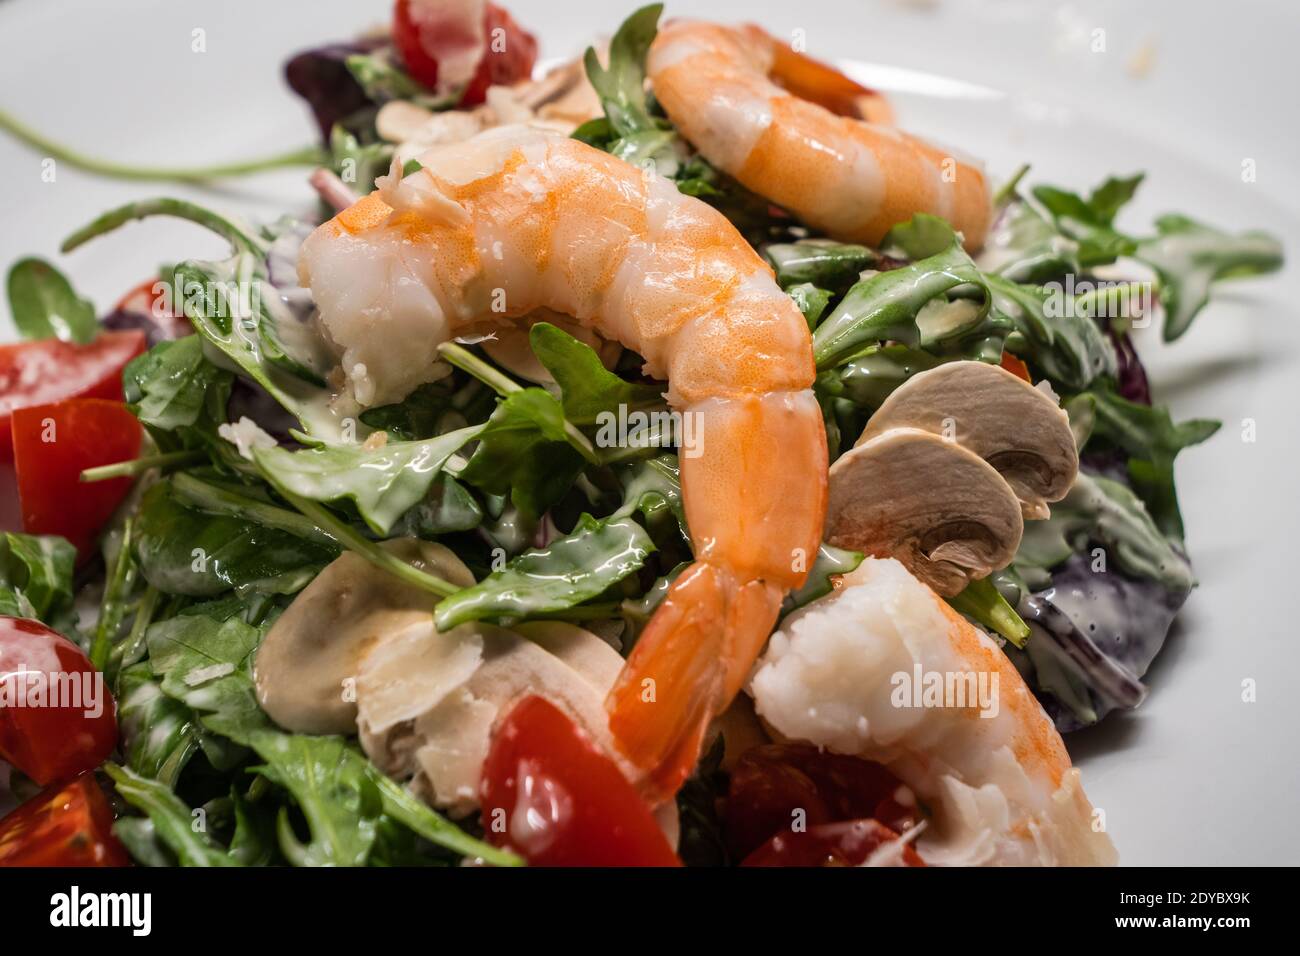 Arugula or Rocket Salad with Prawns or Shrimps, Tomato, Button Mushrooms, Served on a White Plate Stock Photo